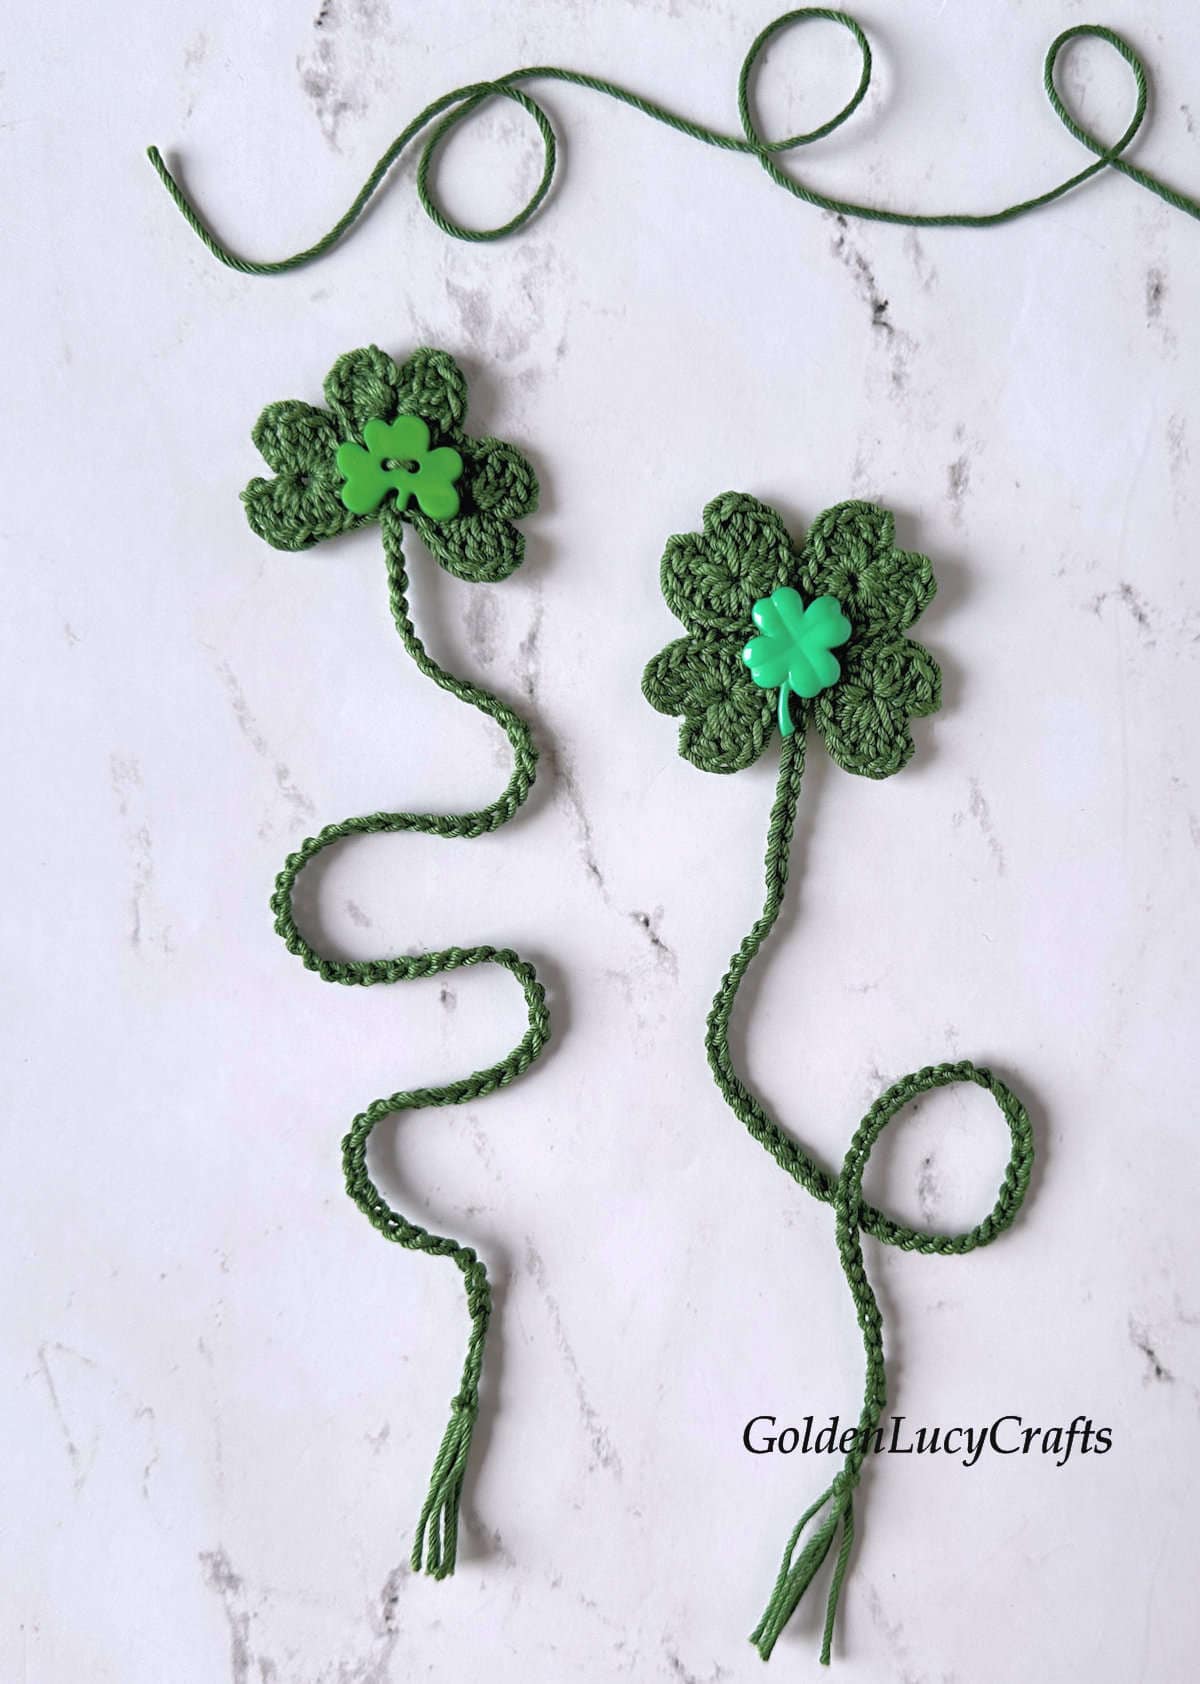 Two crocheted green bookmarks for St. Patrick's Day.